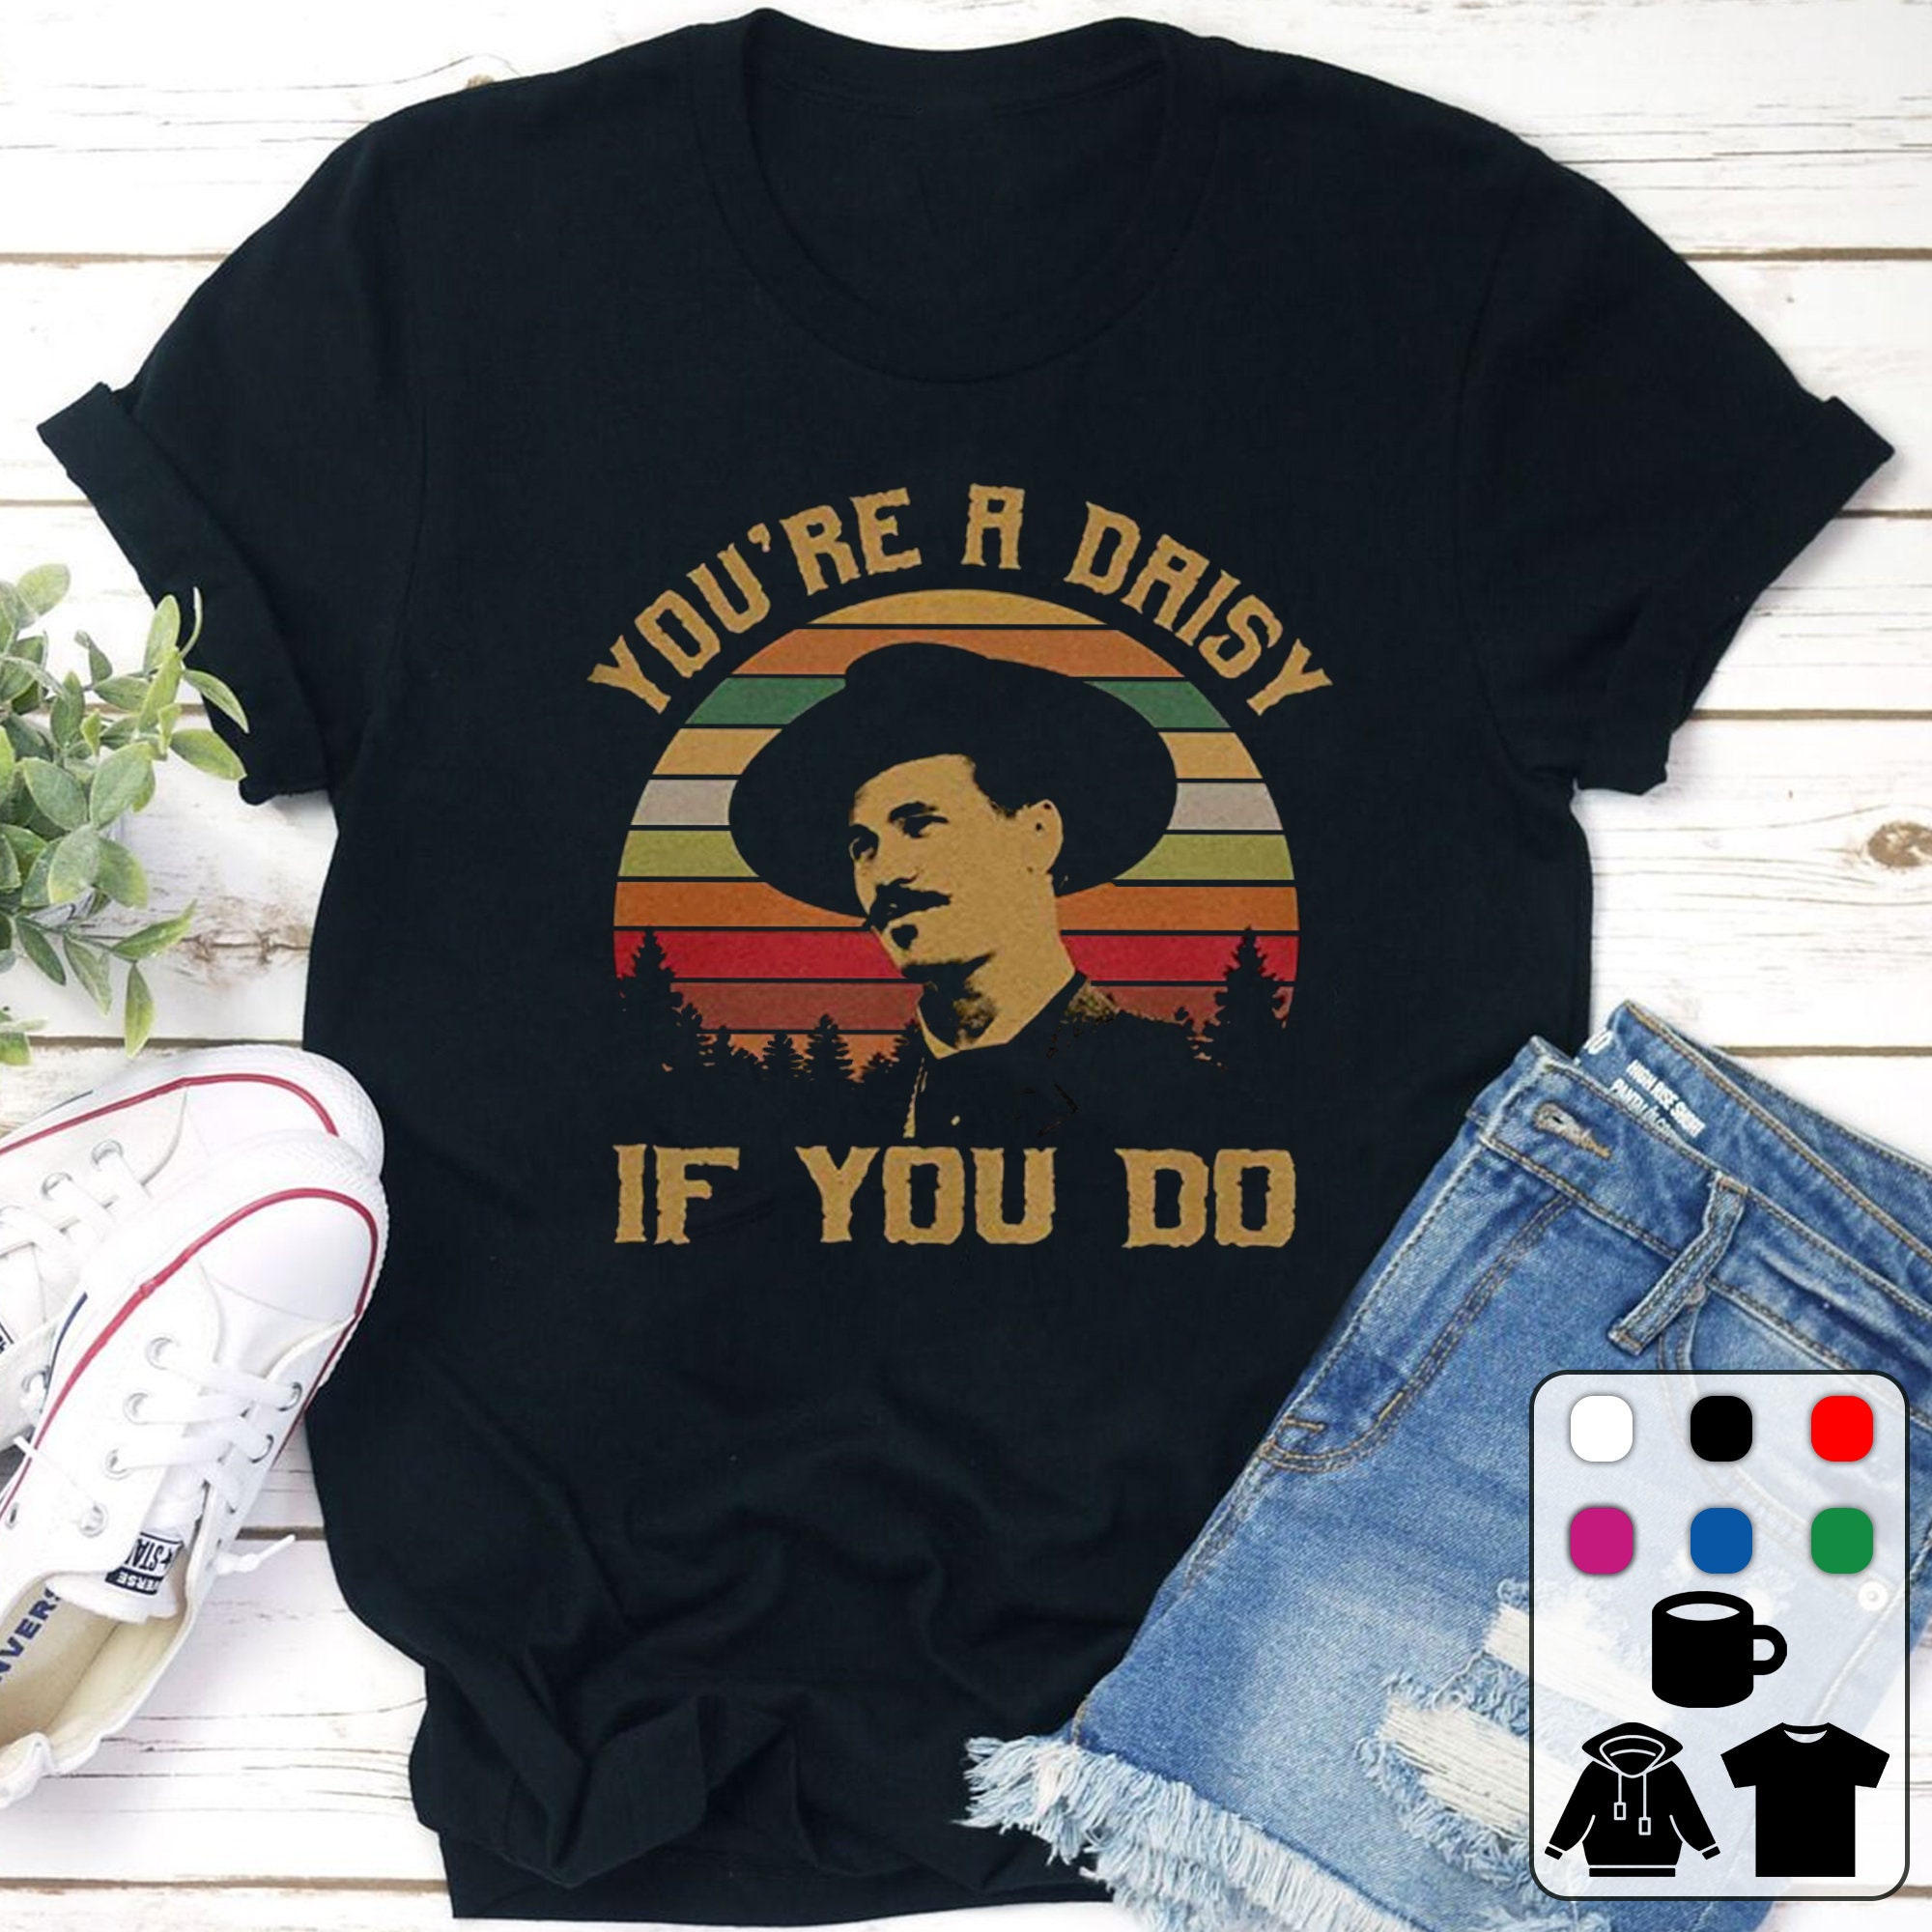 Discover You're A Daisy If You Do Shirts, Tombstone Shirt, 90s Vintage Retro Movie T Shirt